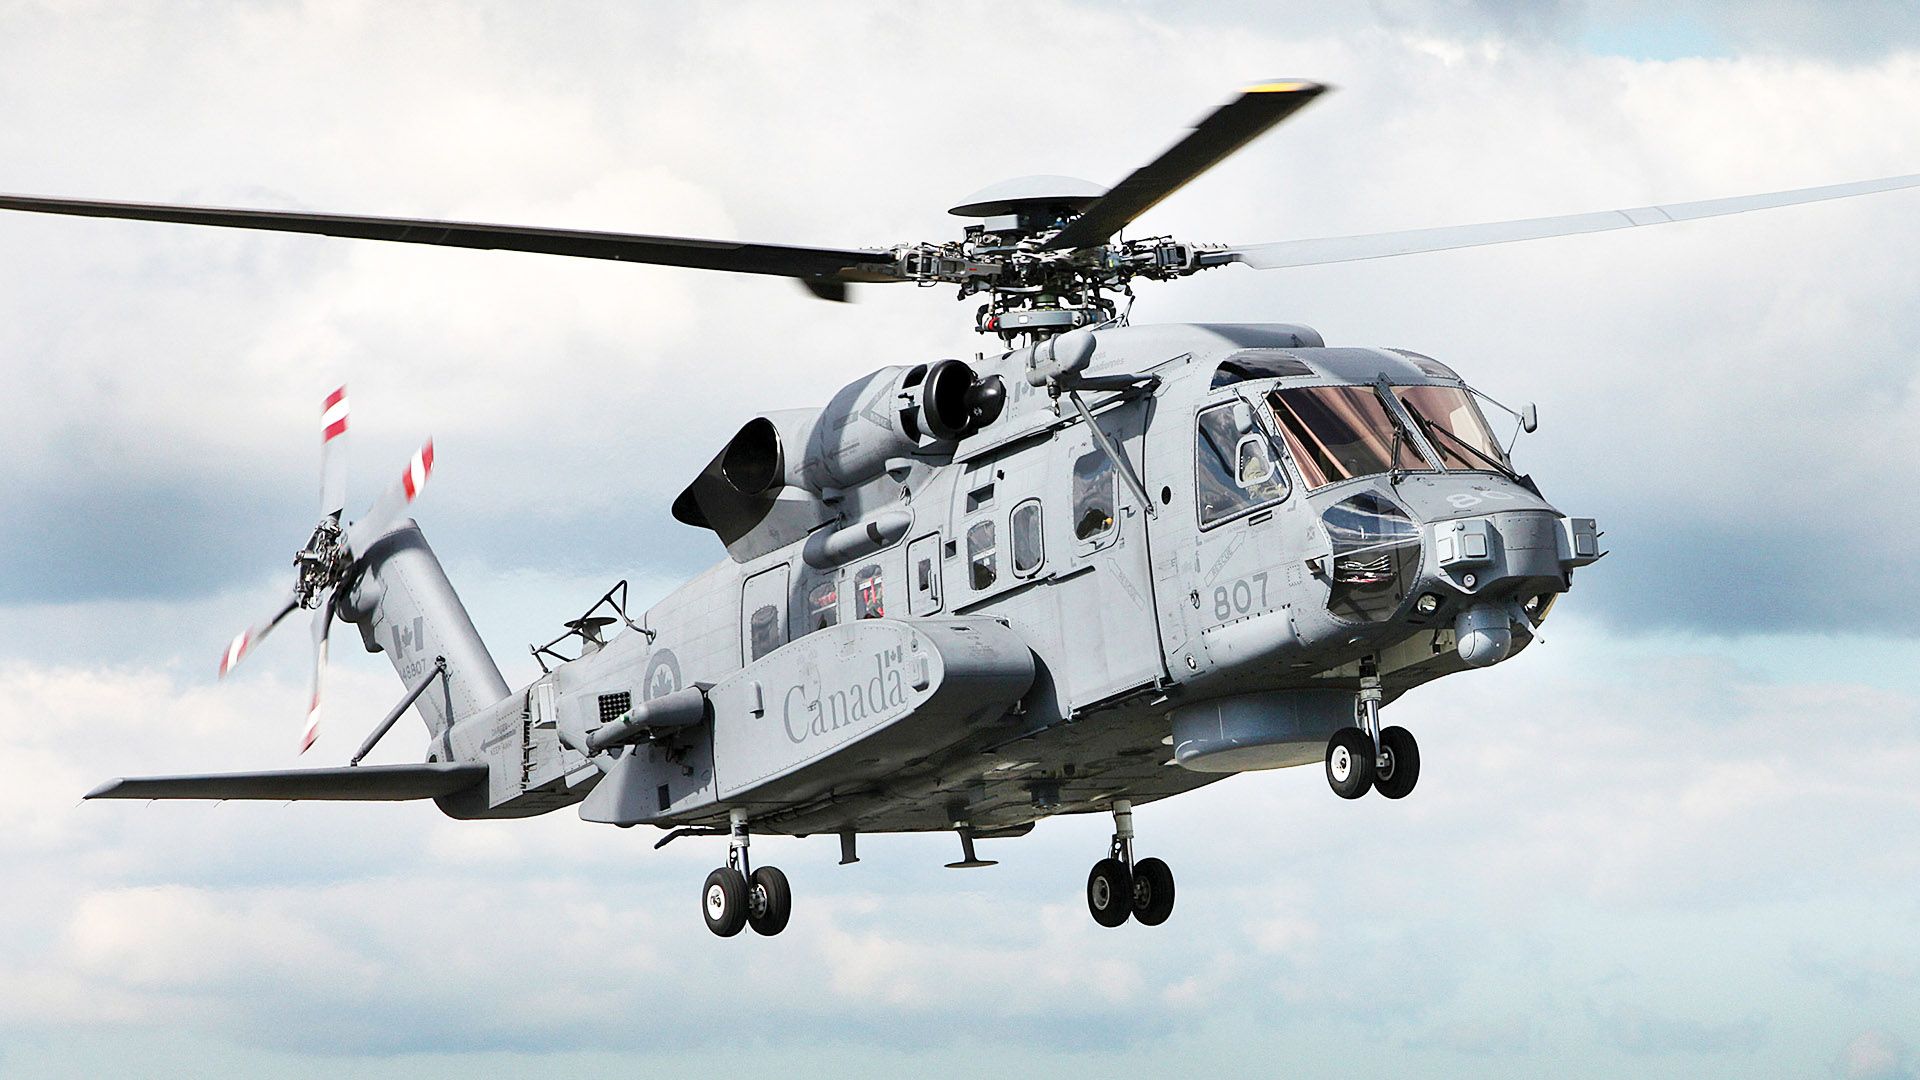 Canadian Armed Forces Orders Operational Pause For CH 148 Cyclone Helicopter Fleet Following Crash